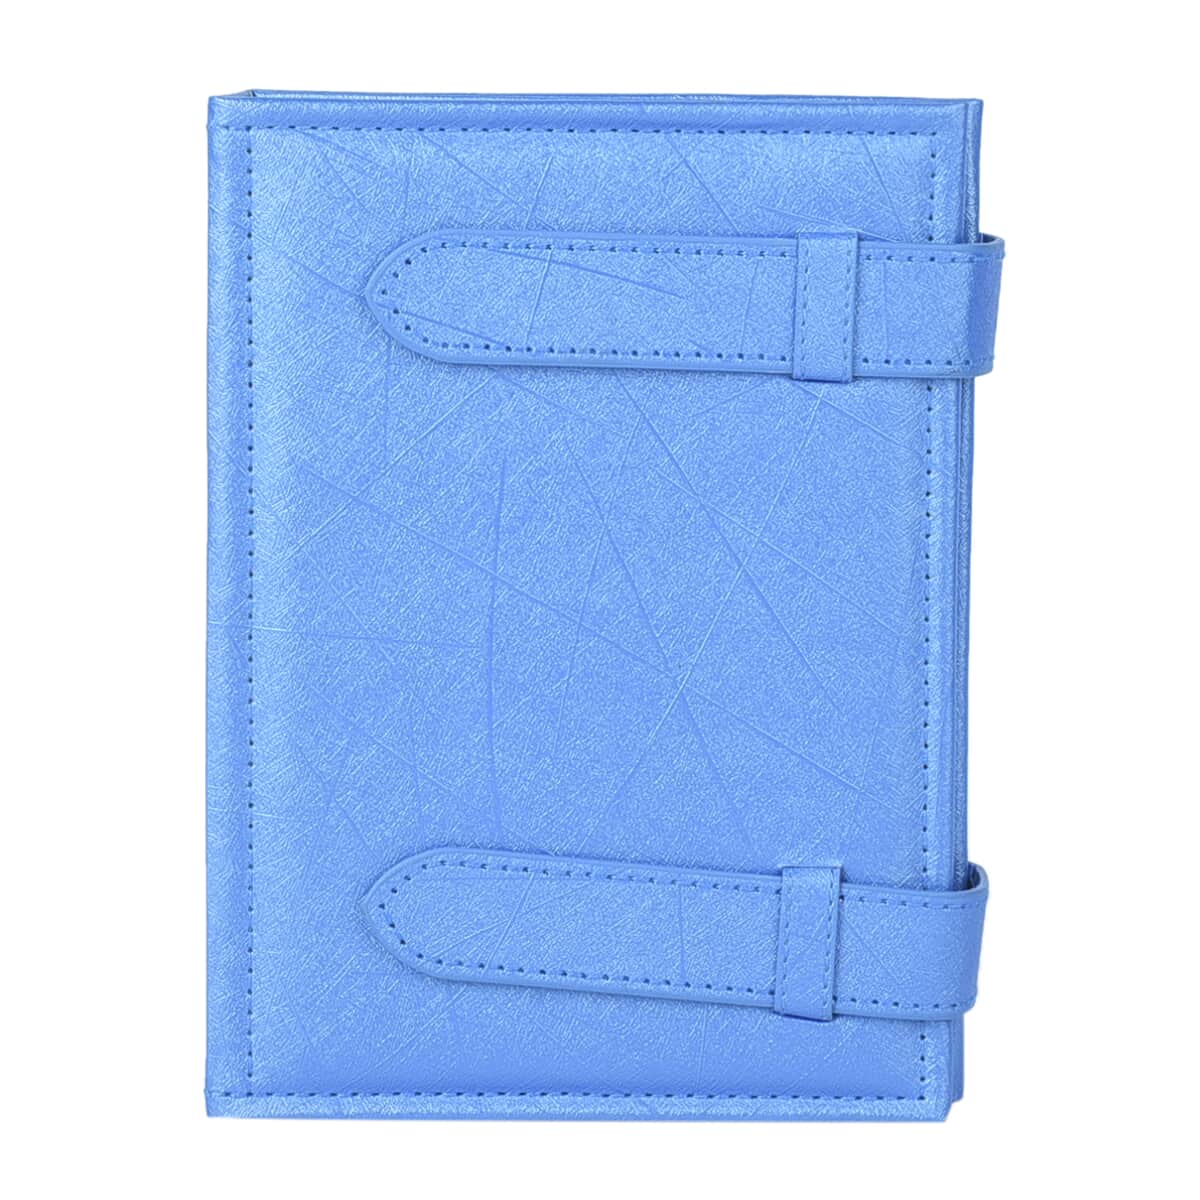 Blue Faux Leather 4 Page Book Design Earrings Hoder (7.28"x5.31"x1.57") image number 0